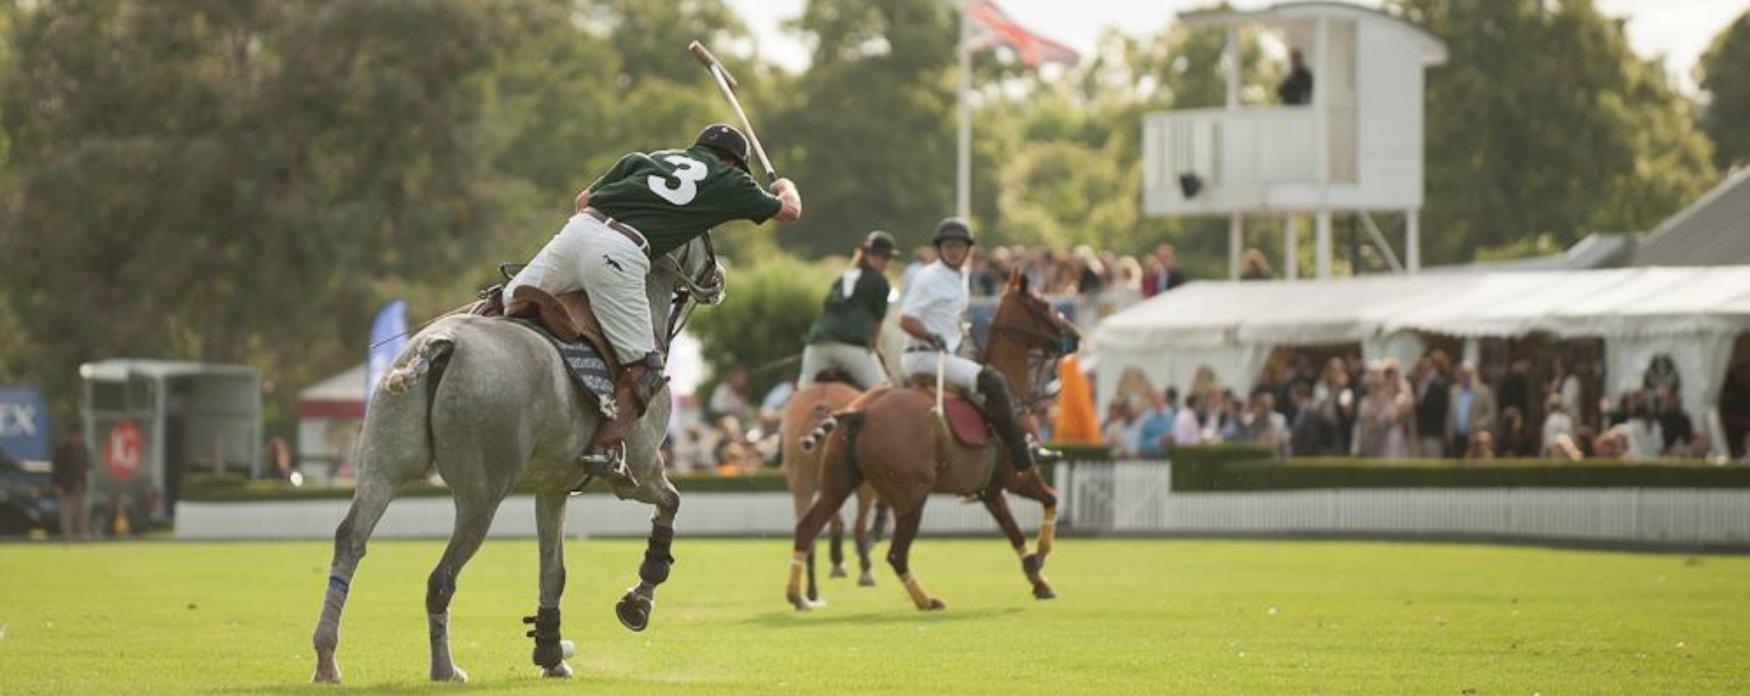 A picture of players playing polo